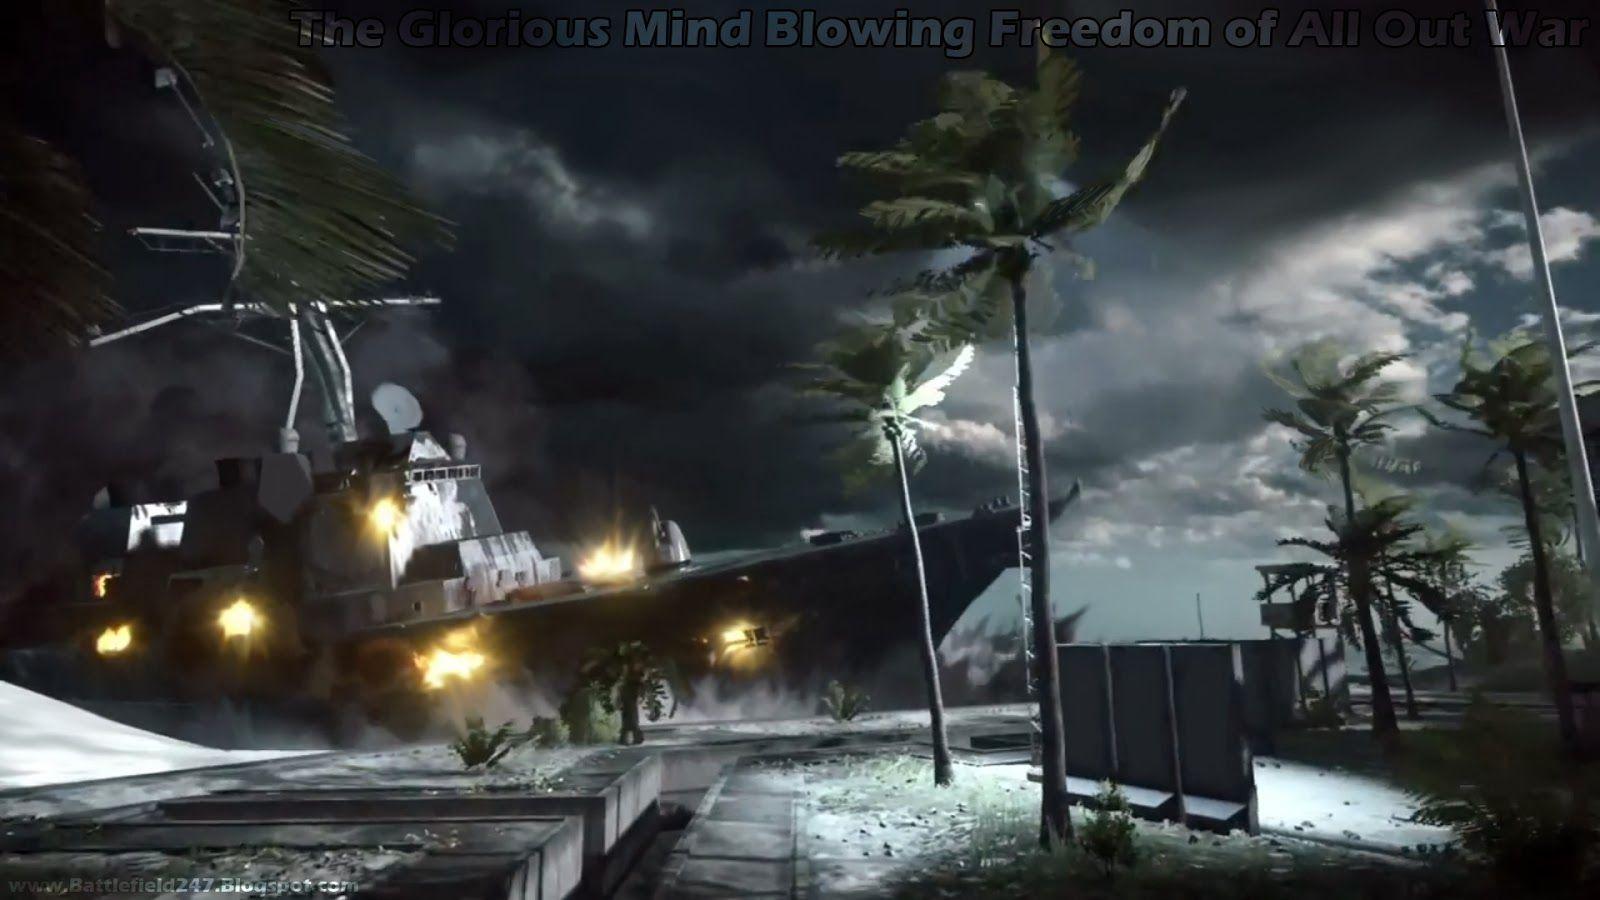 ✪ Battlefield 247 ✪: ✪ [BF4 Wallpaper] The Glorious Mind Blowing